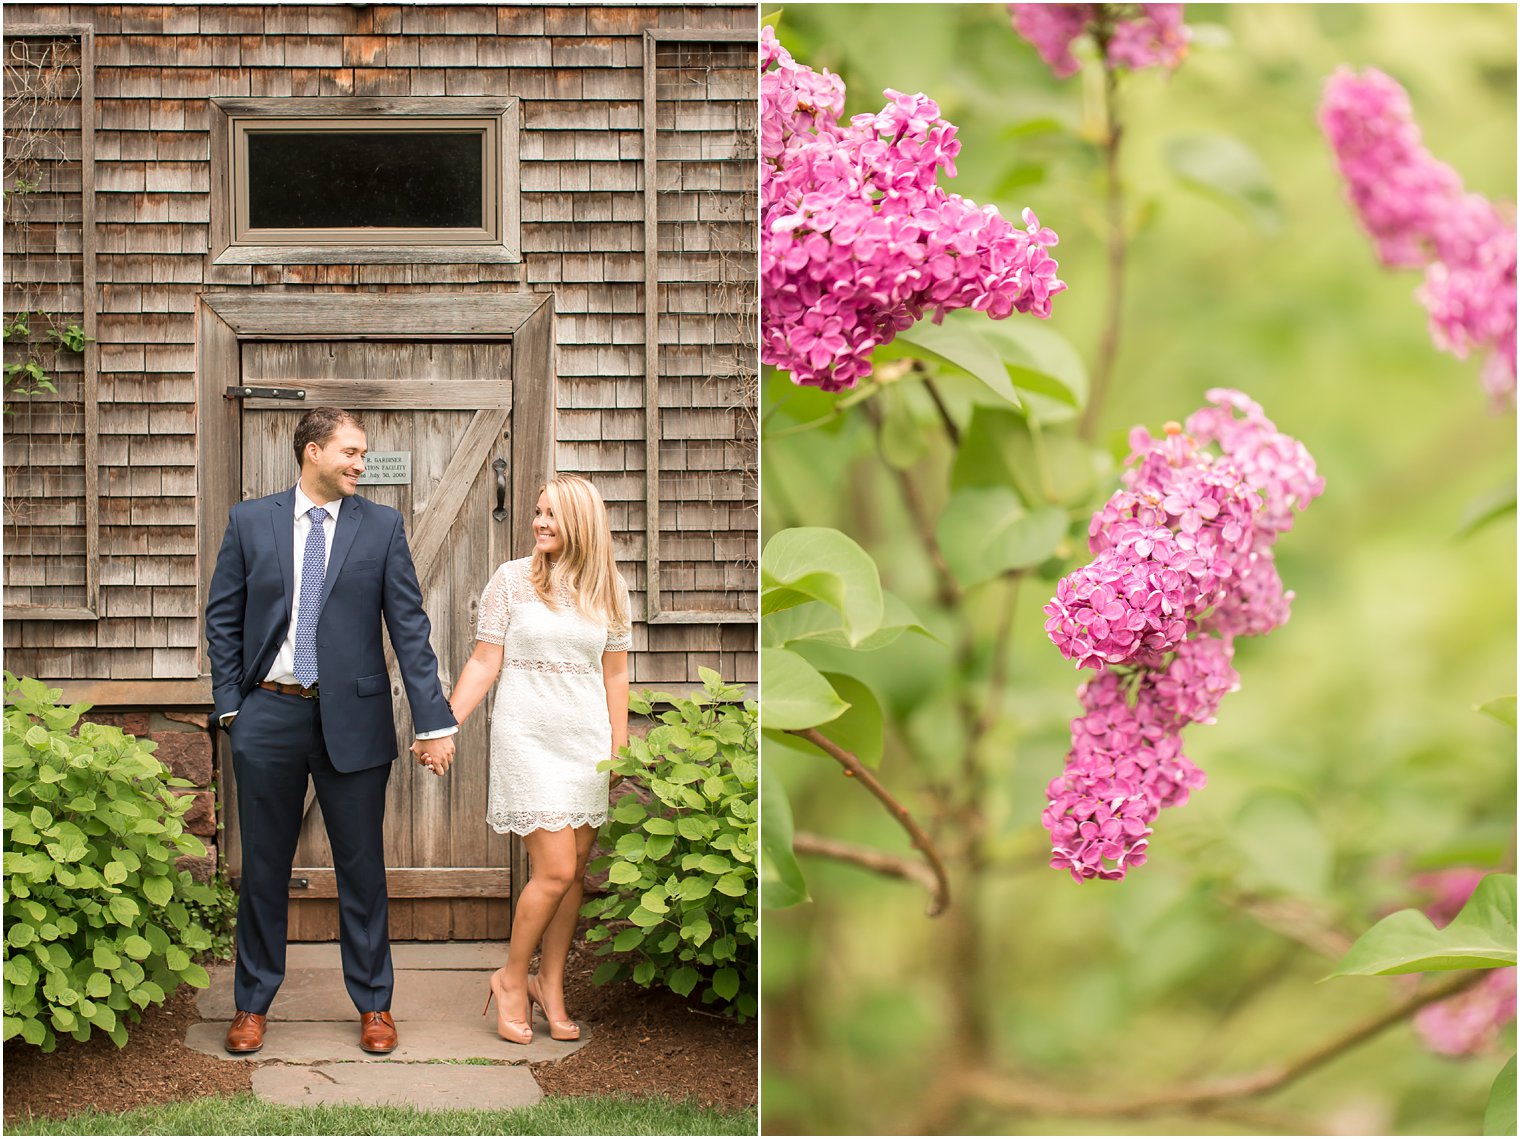 Engagement photo in the spring | Photo by Idalia Photography